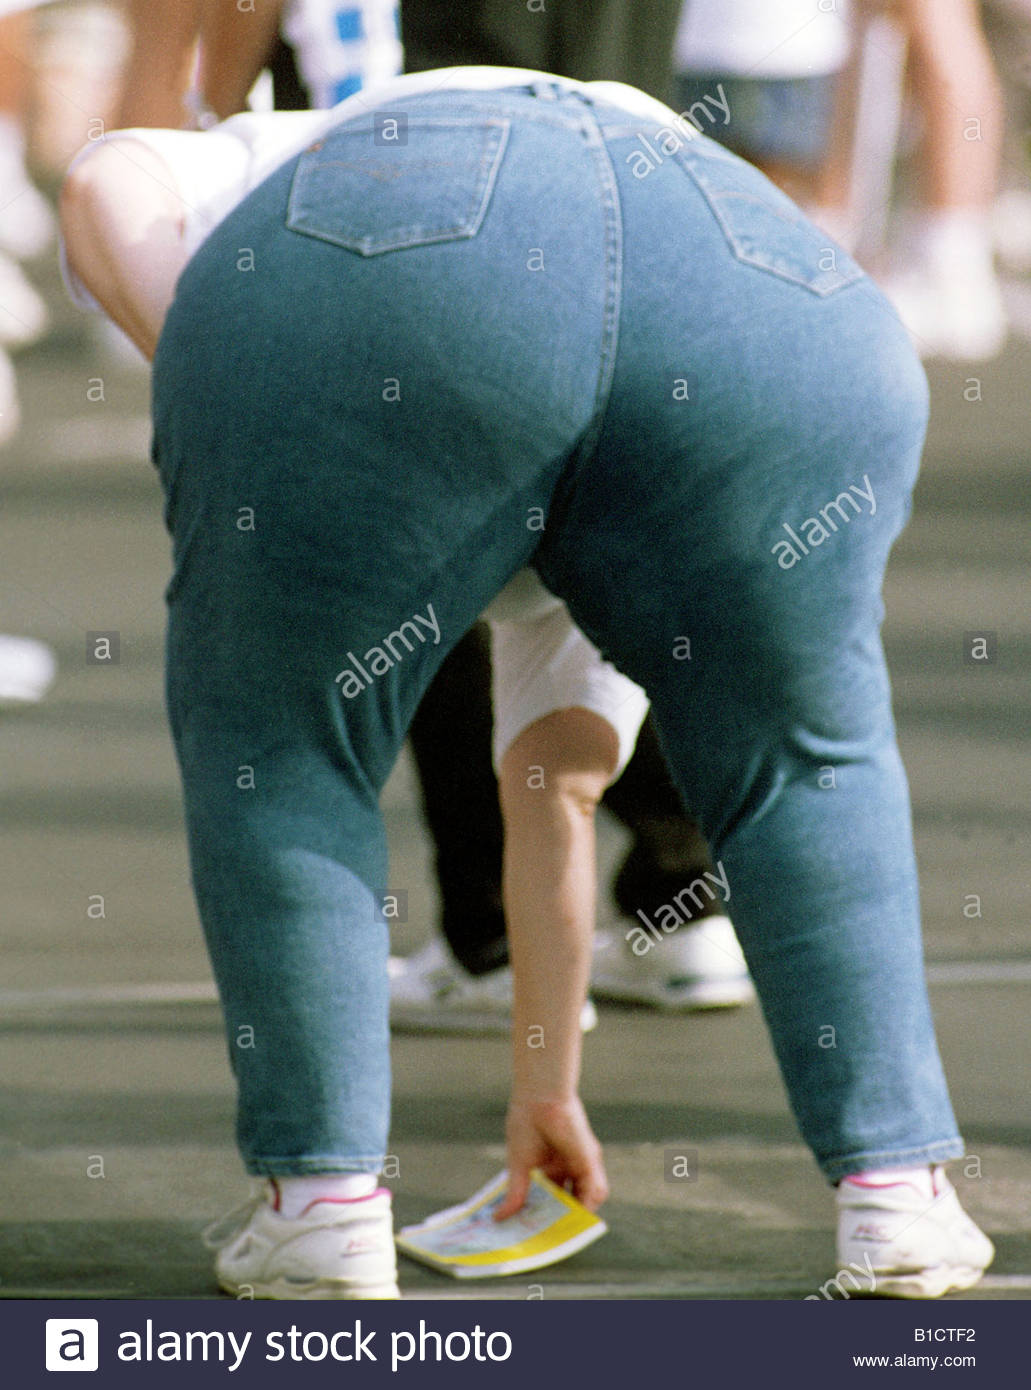 Fat Lady Bending Over Stock Photos Fat Lady Bending Over Stock Images